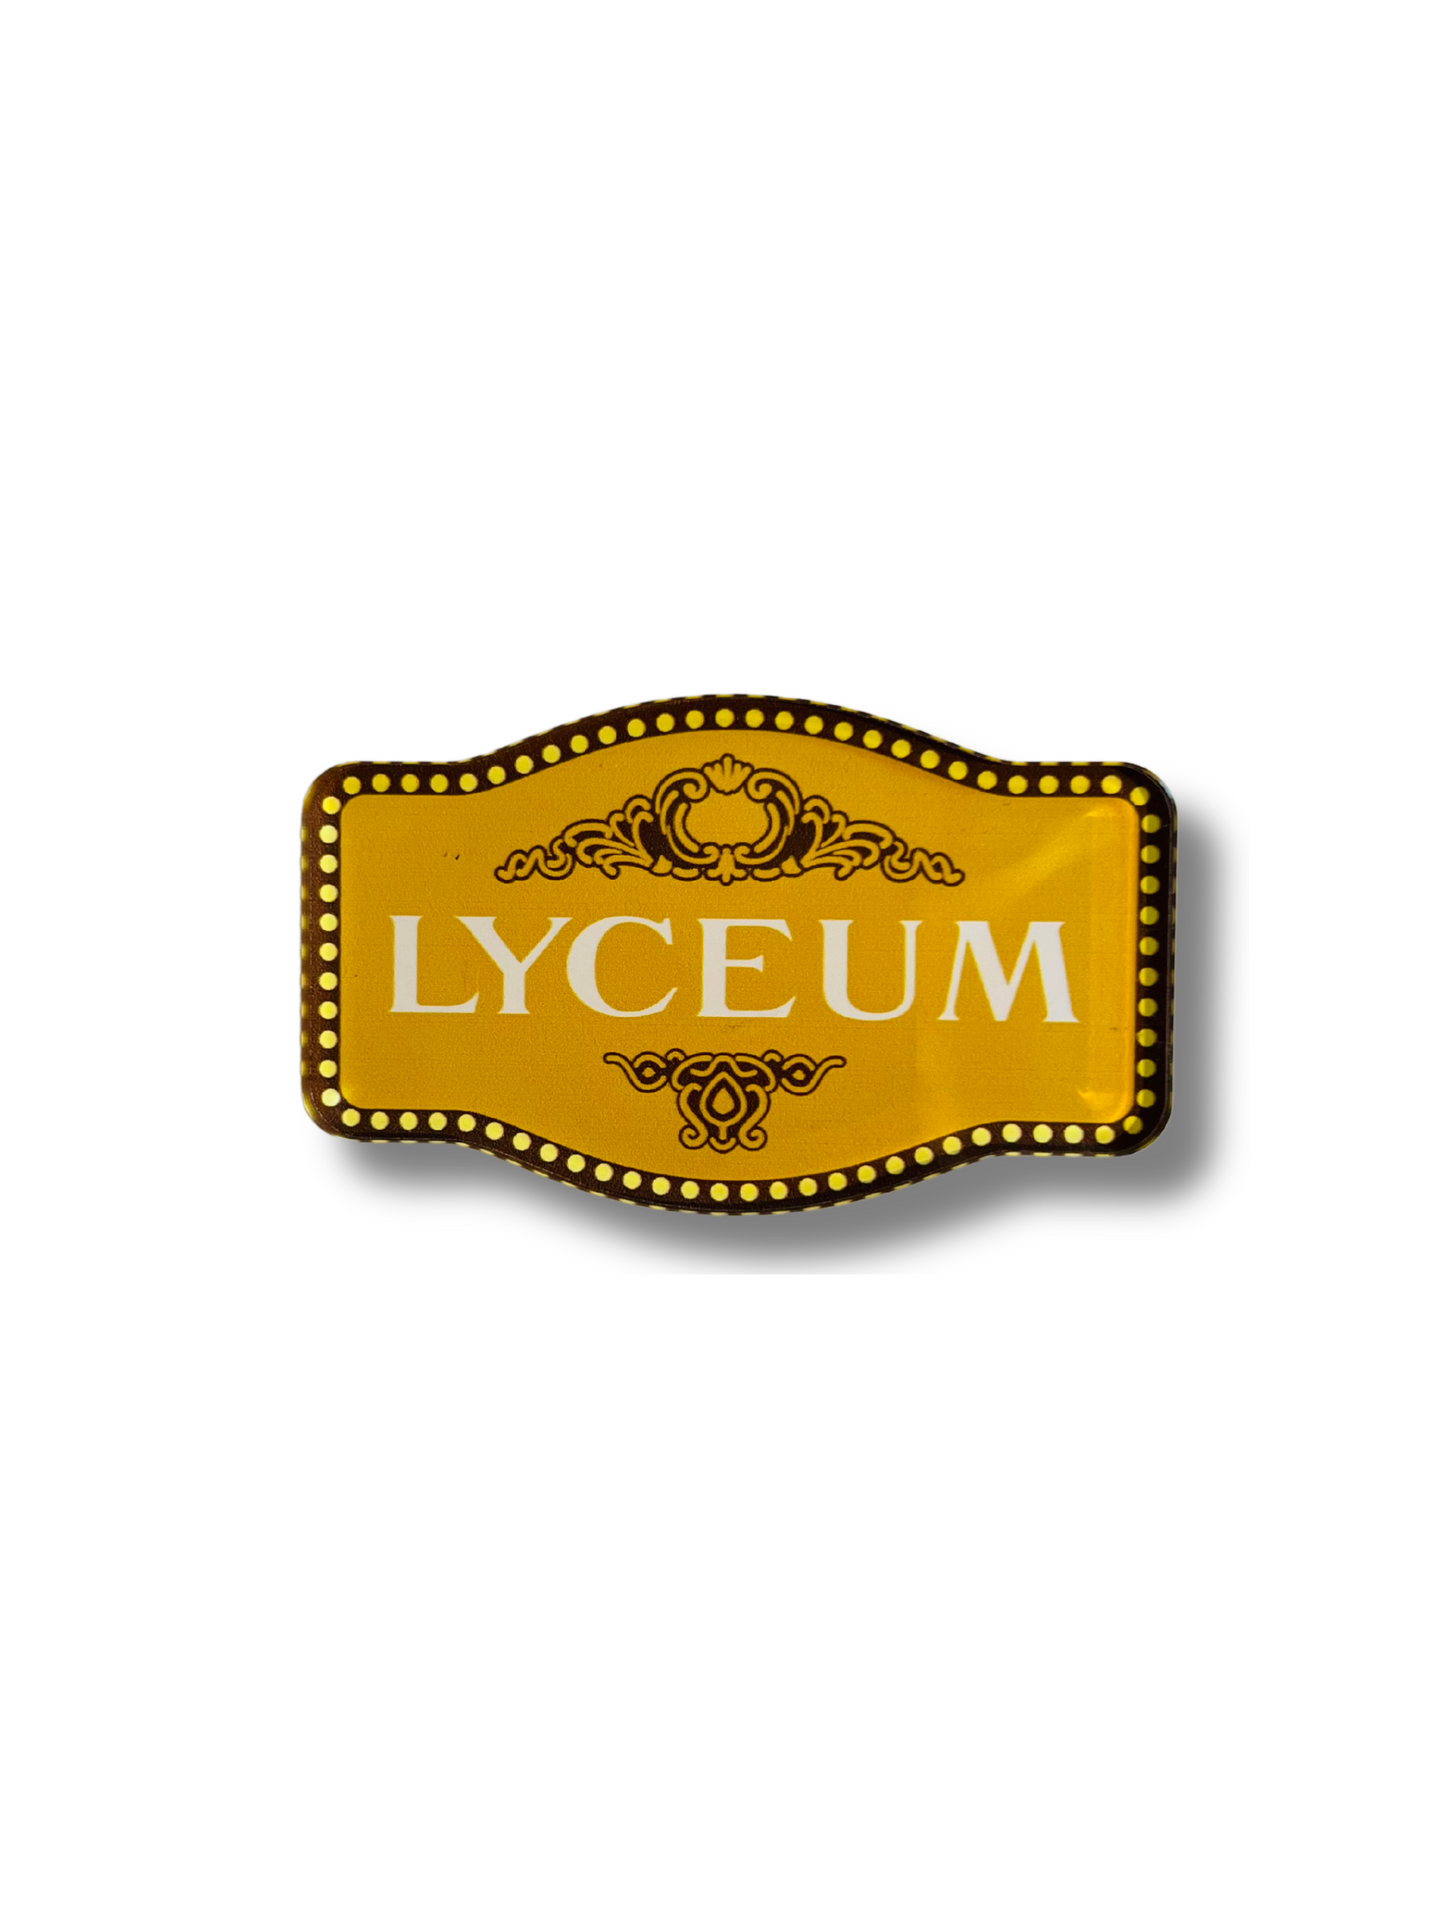 Lyceum Marquee Acrylic Magnet